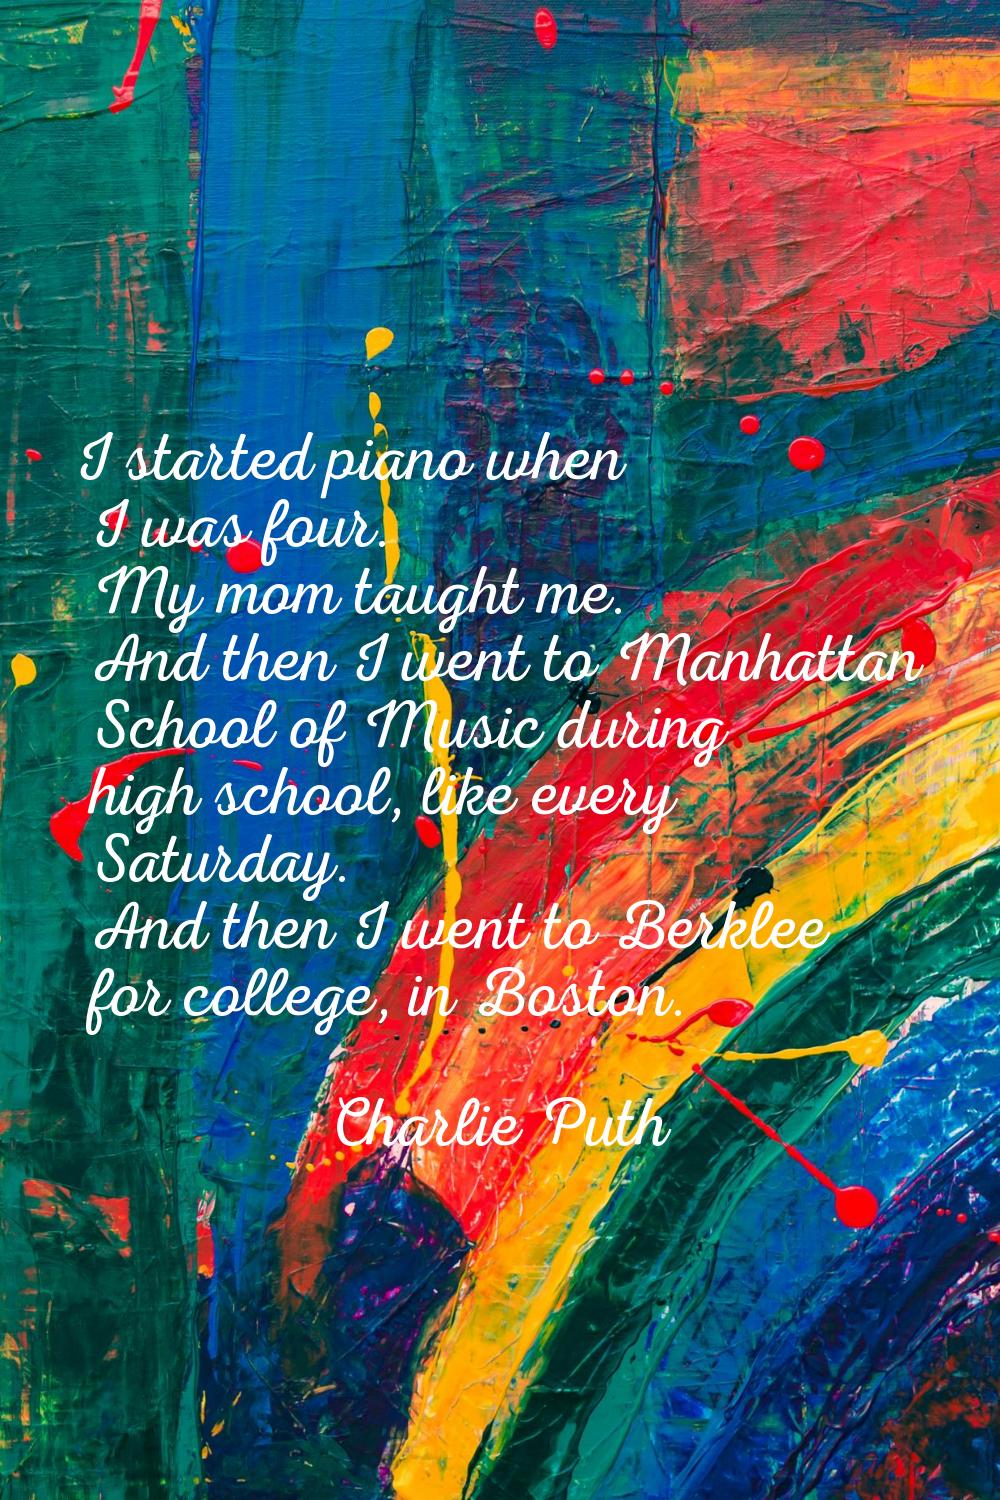 I started piano when I was four. My mom taught me. And then I went to Manhattan School of Music dur